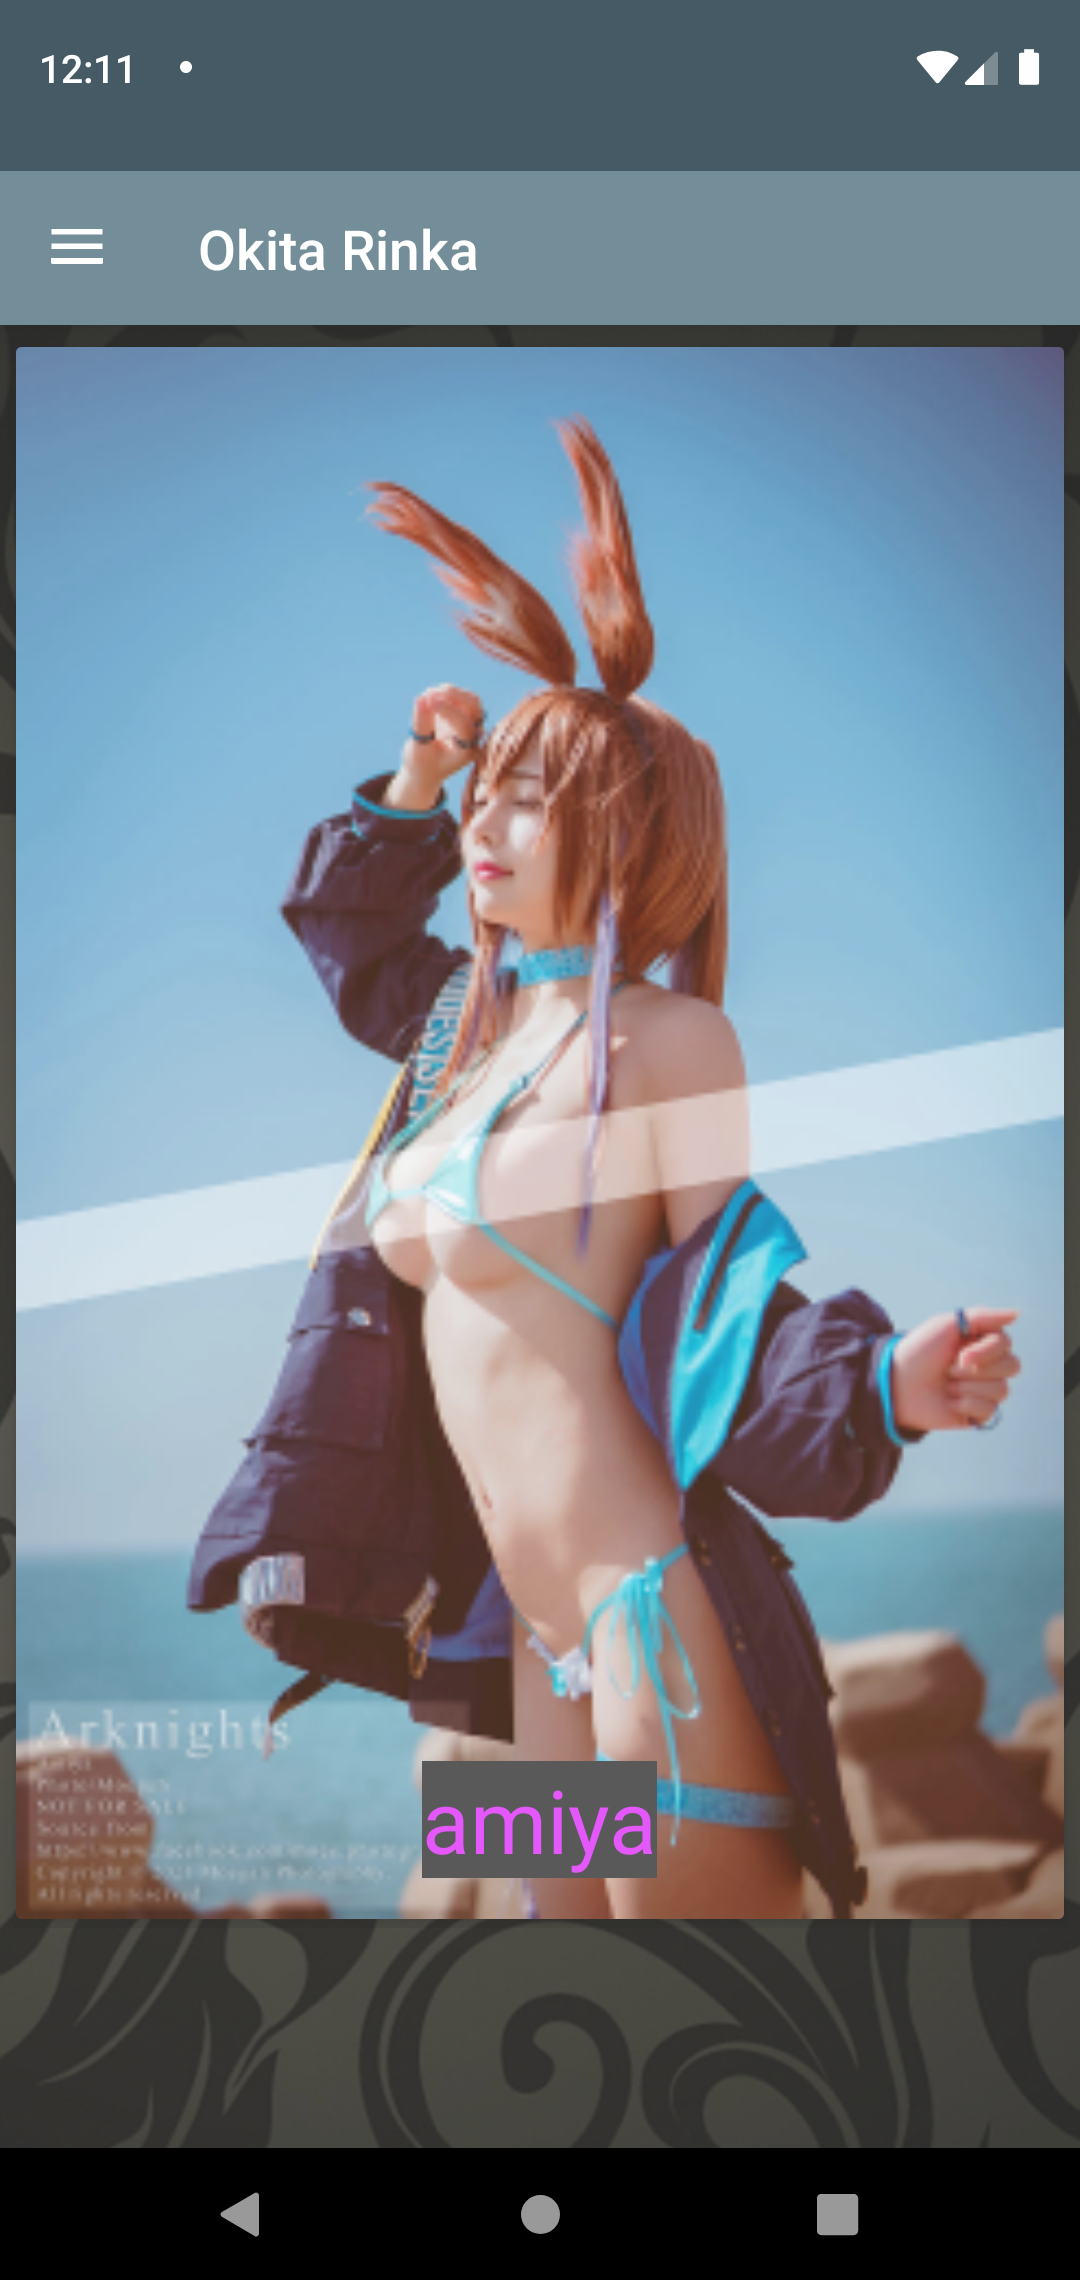 Okita Rinka Pictues hentai,aplikasi,adult,app,with,pic,apk,softcore,erotic,stacy,apps,pictures,wallpaper,asian,best,sissy,android,adams,anime,gag,mobile,photos,cosplay